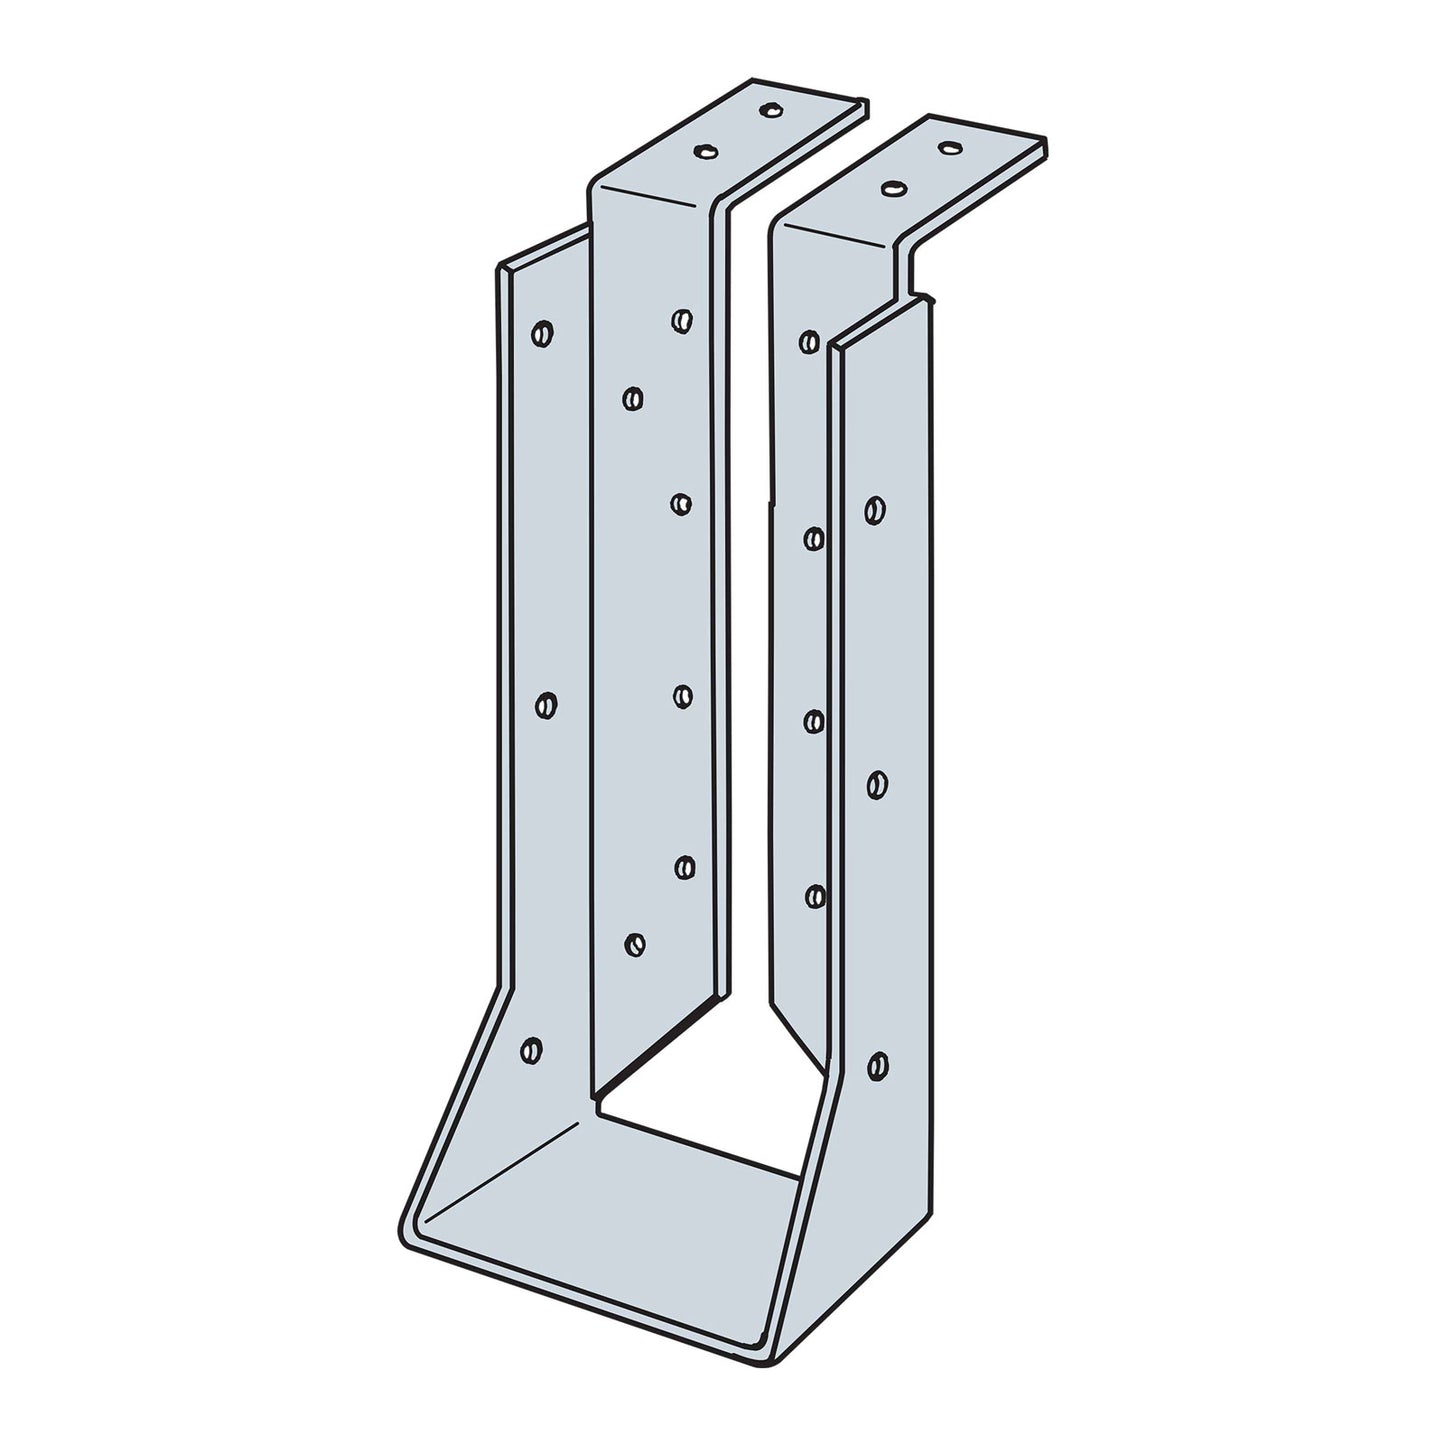 Simpson HUC614TF Heavy Top-Flange Hanger with Concealed Flanges - G90 Galvanized